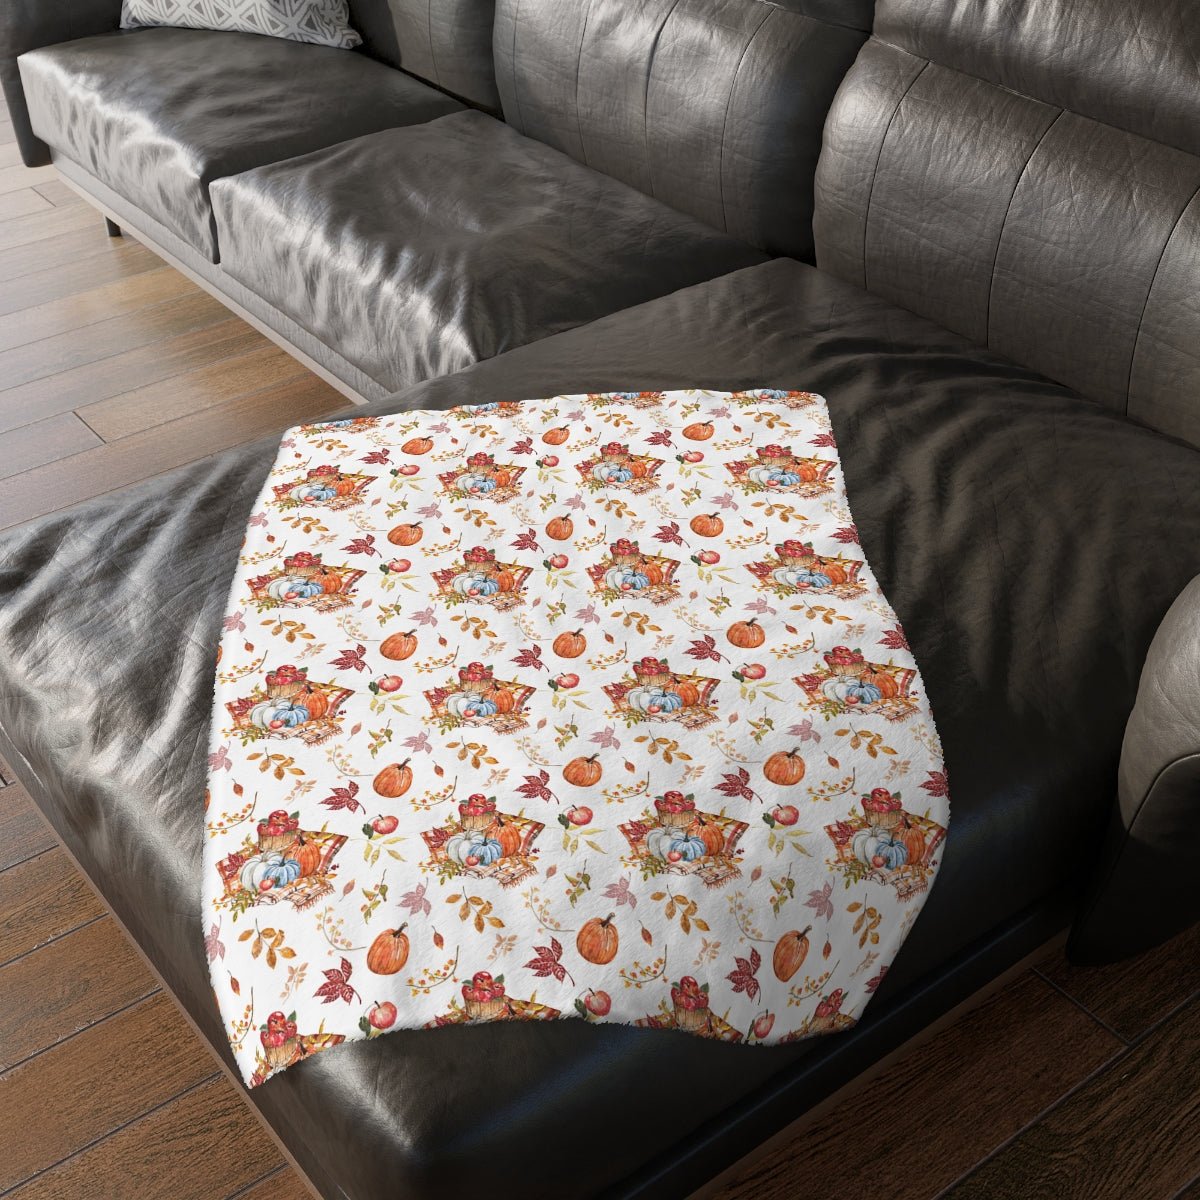 Fall Pumpkins and Apples Velveteen Minky Blanket (Two-sided print) - Puffin Lime